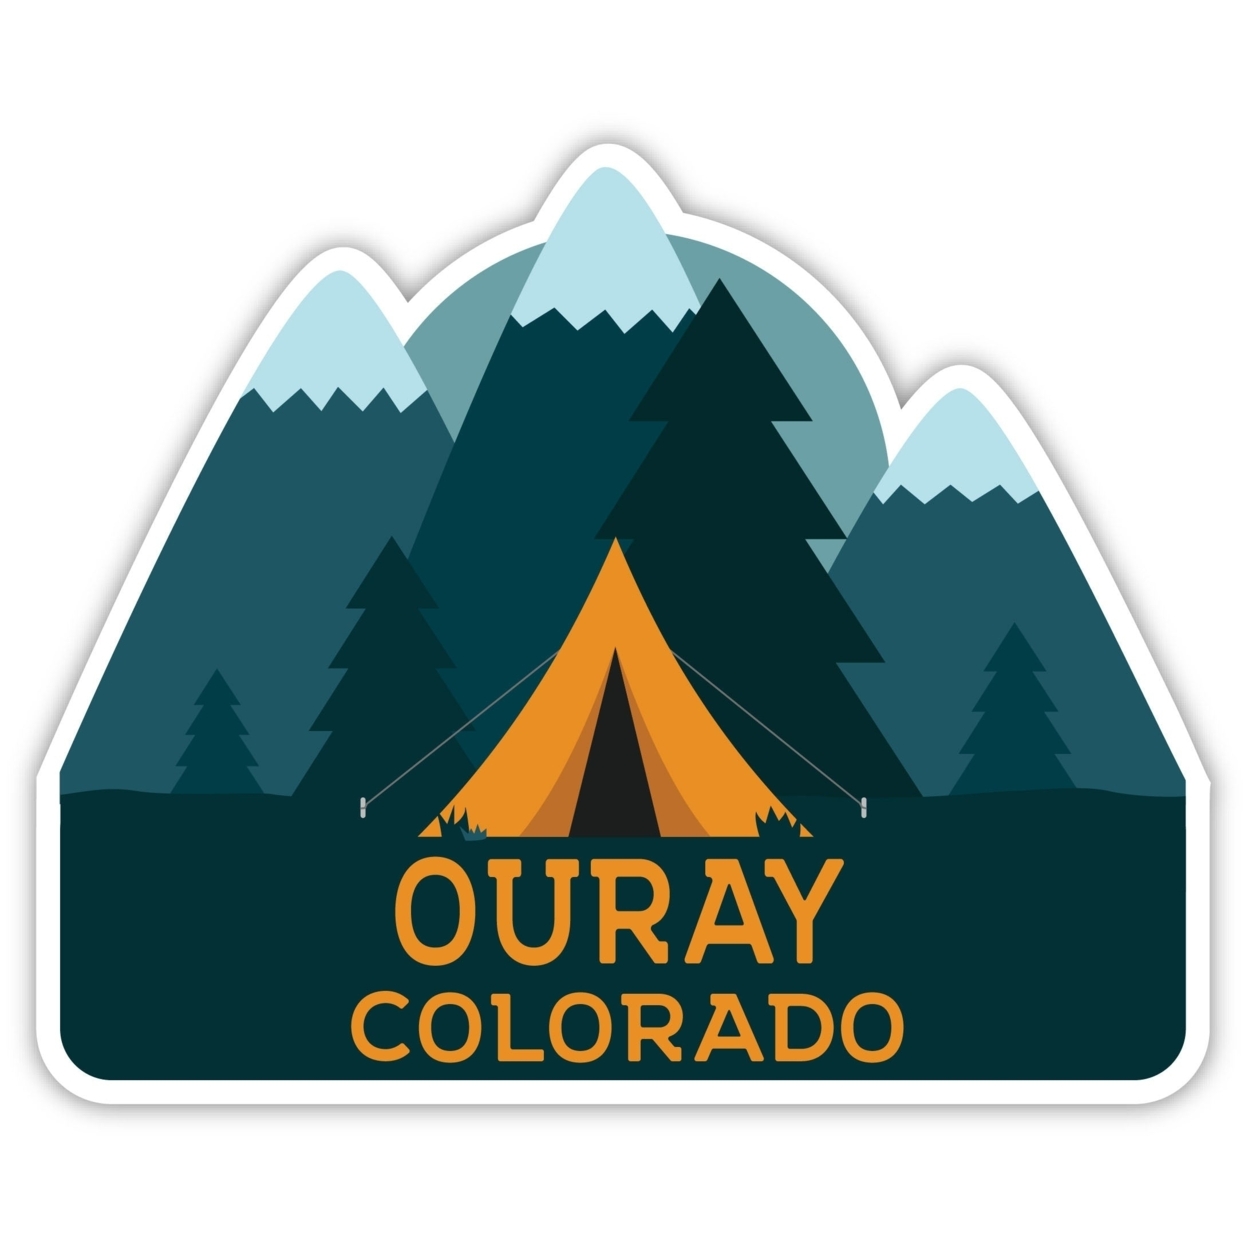 Ouray Colorado Souvenir Decorative Stickers (Choose Theme And Size) - Single Unit, 2-Inch, Adventures Awaits